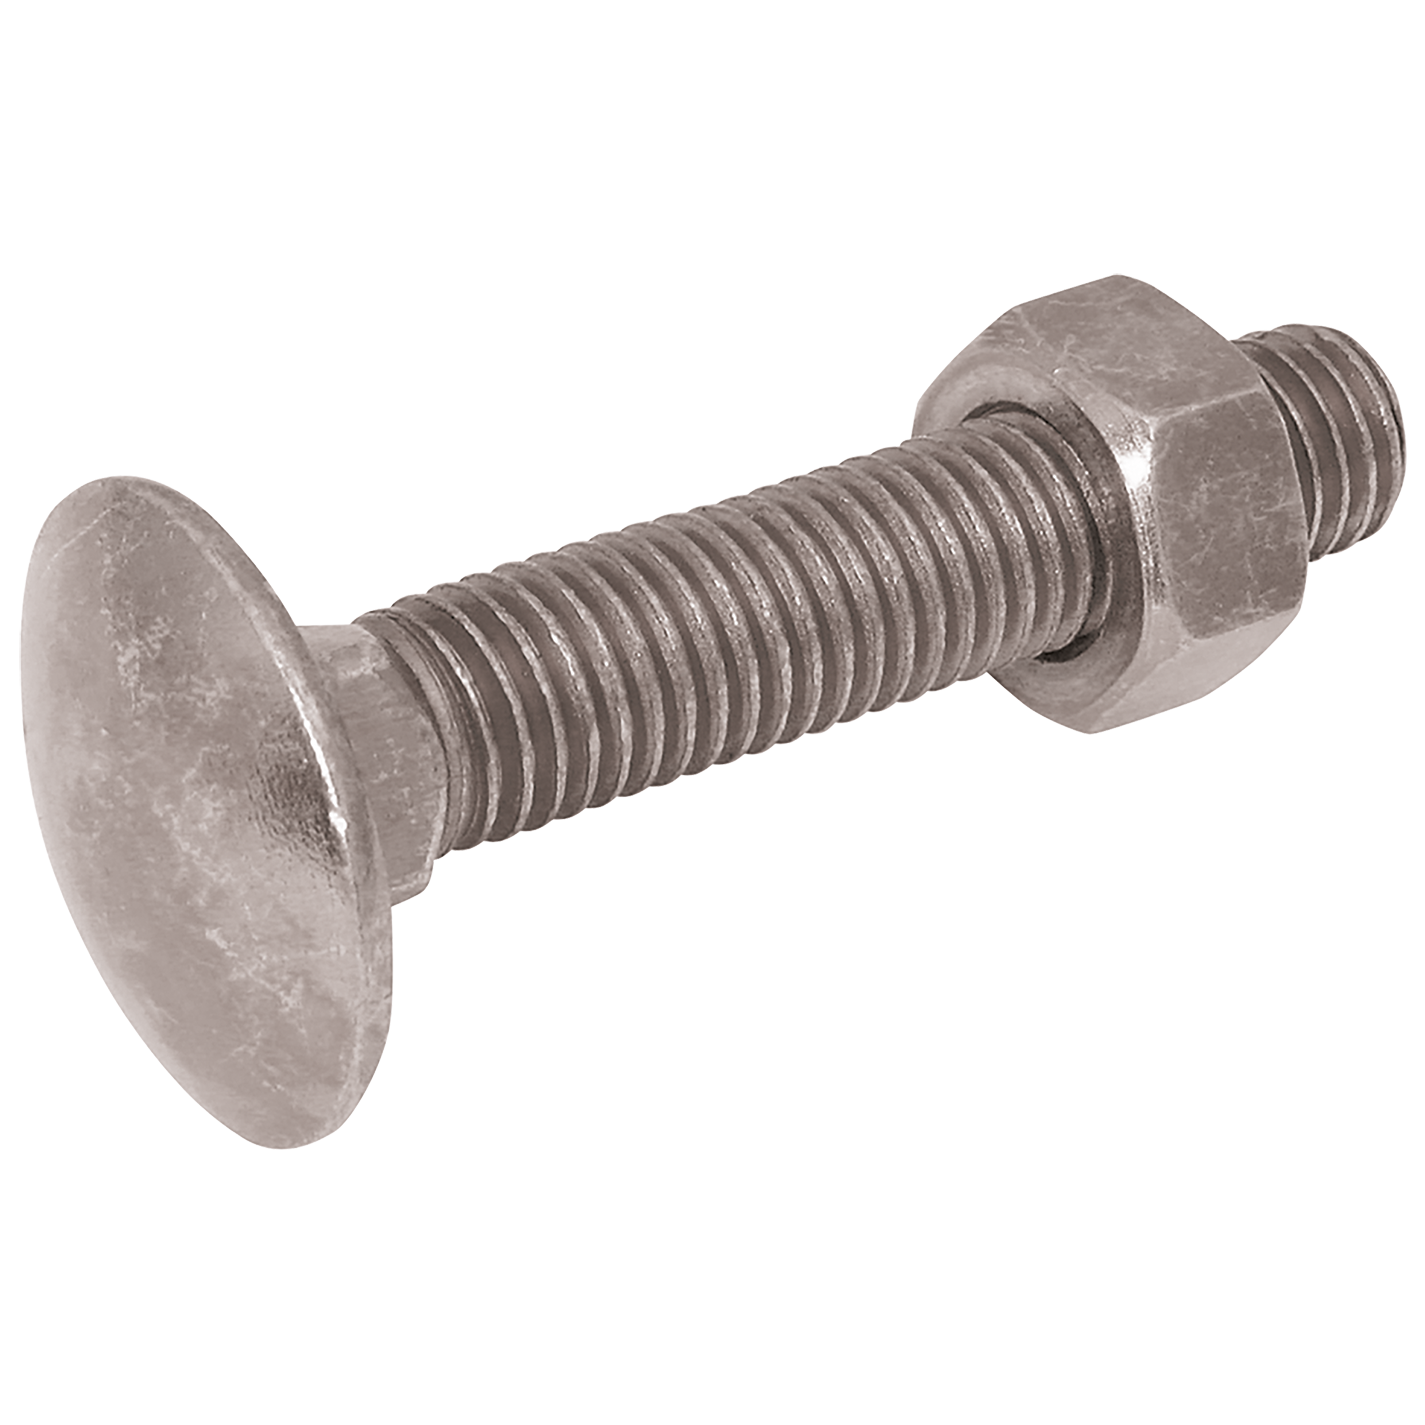 NUT AND BOLT M10 X 60 SQ RD HEX